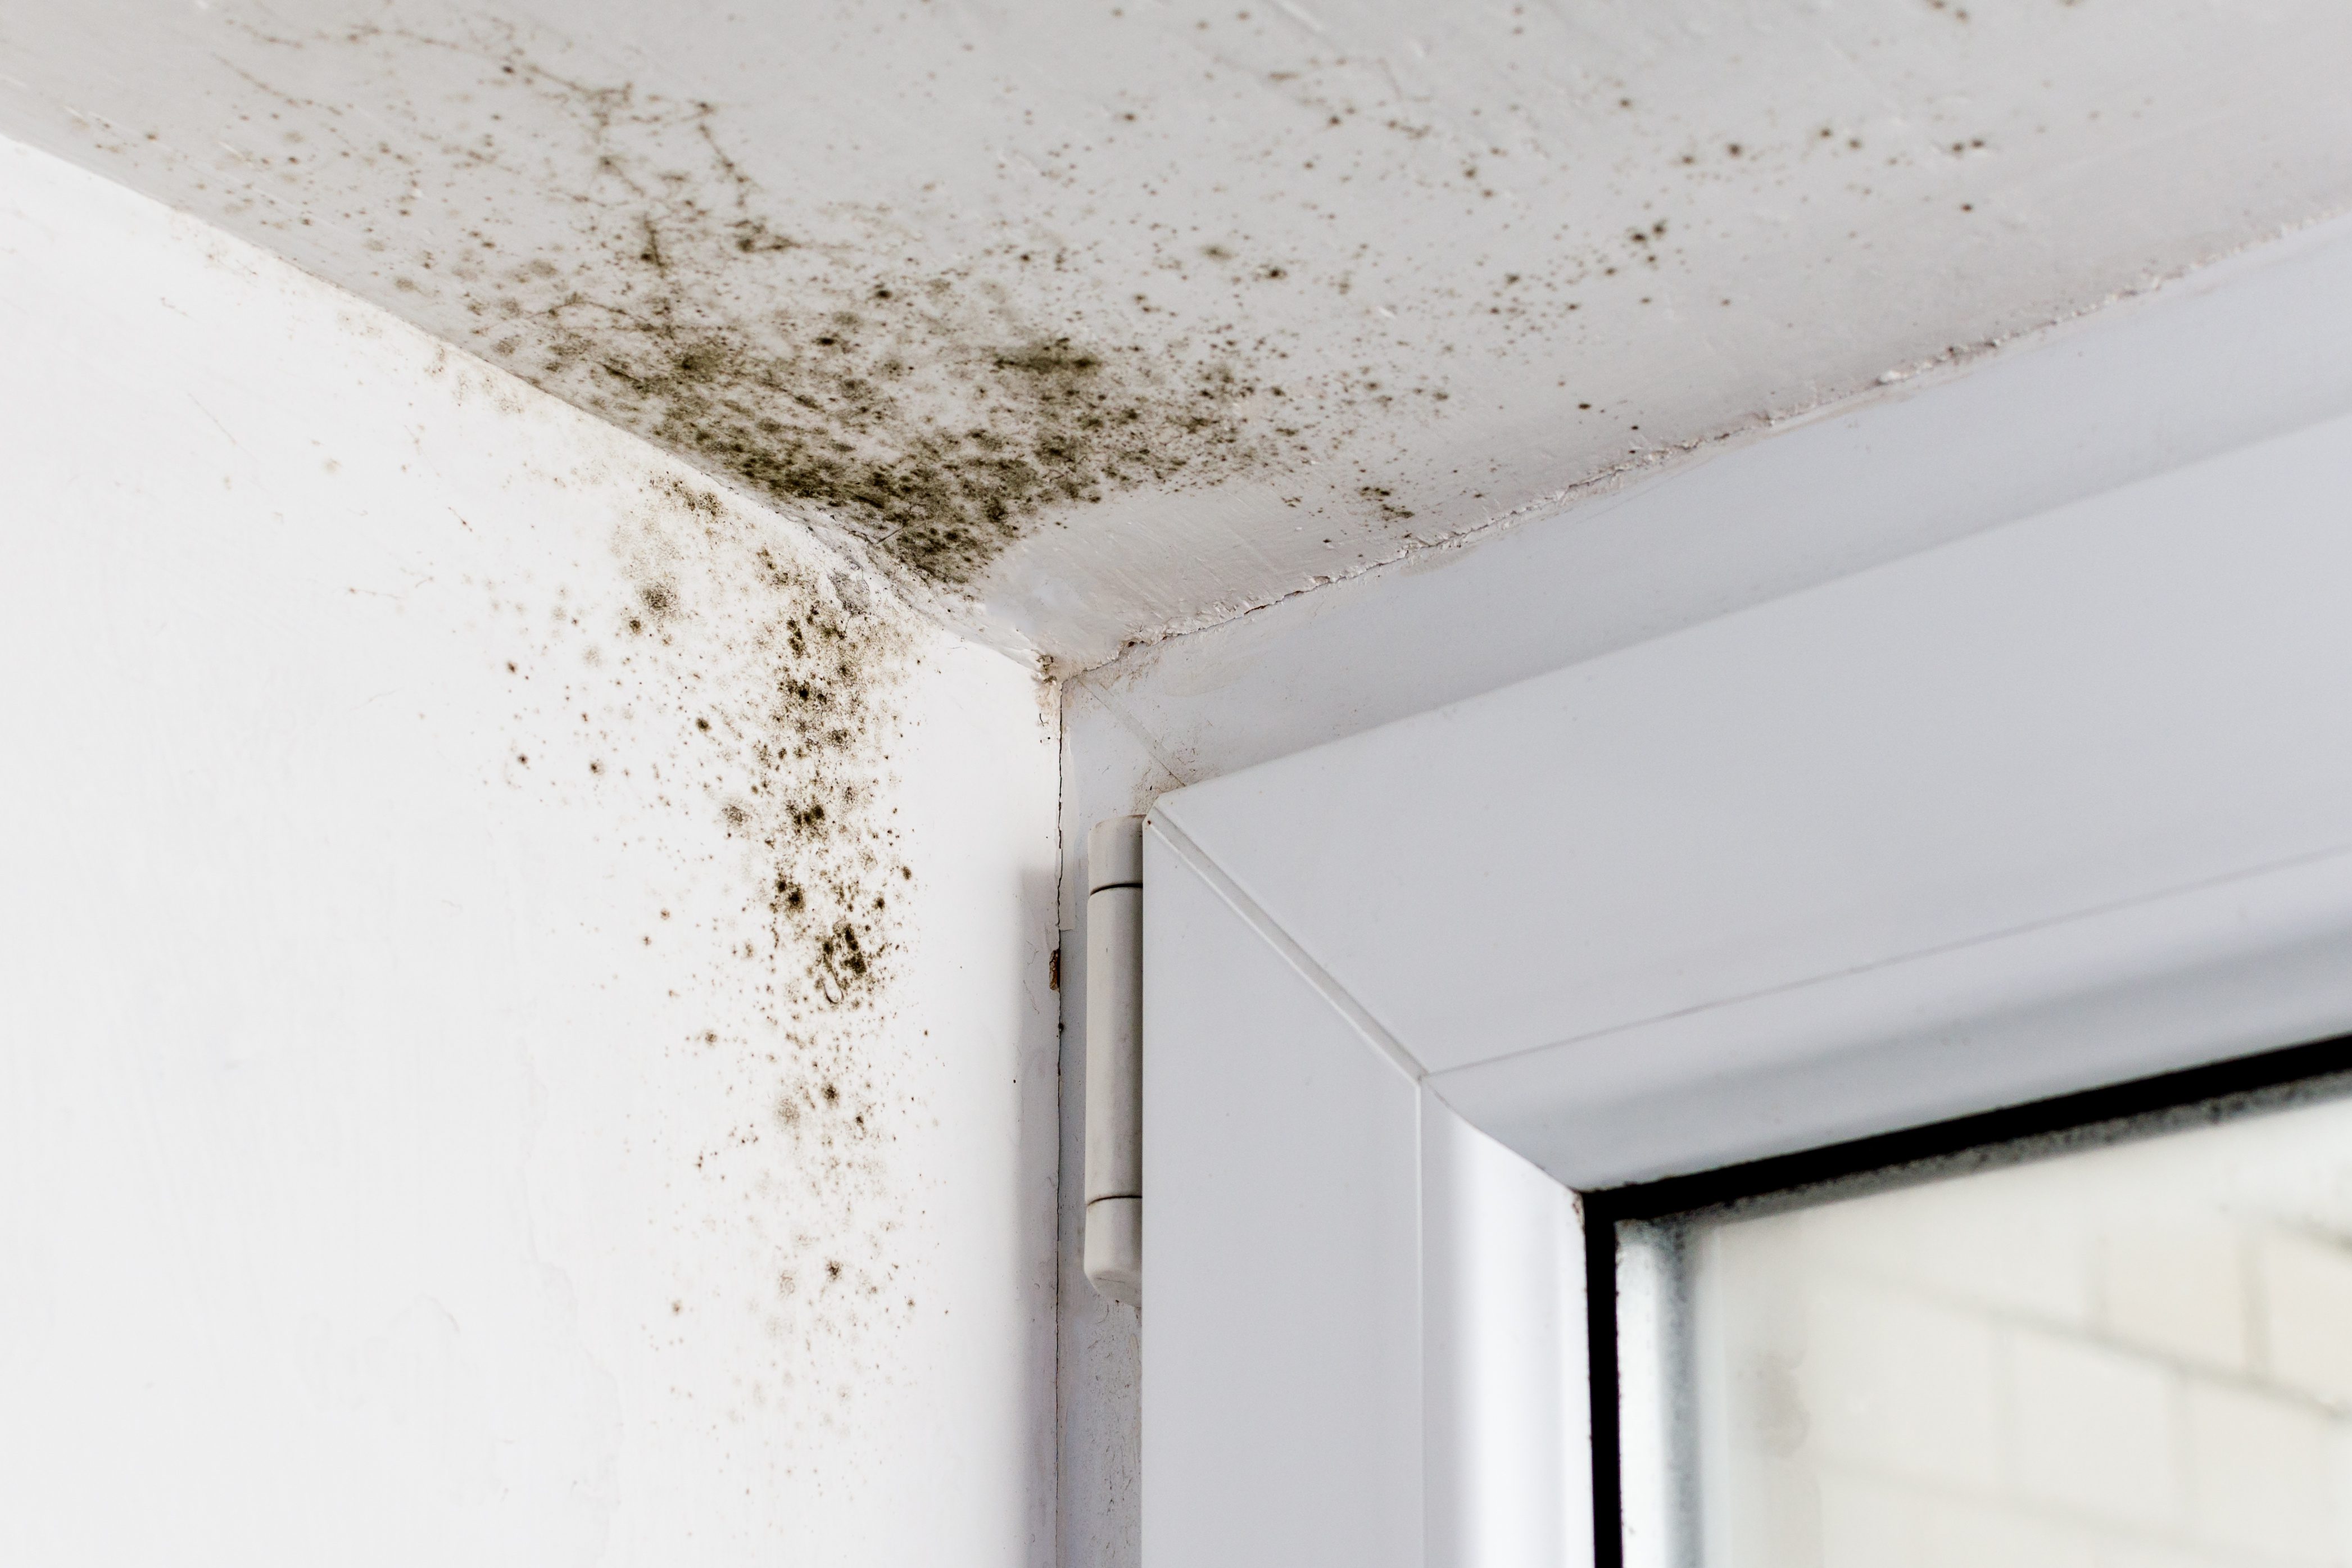 Mold in the corner of the windows